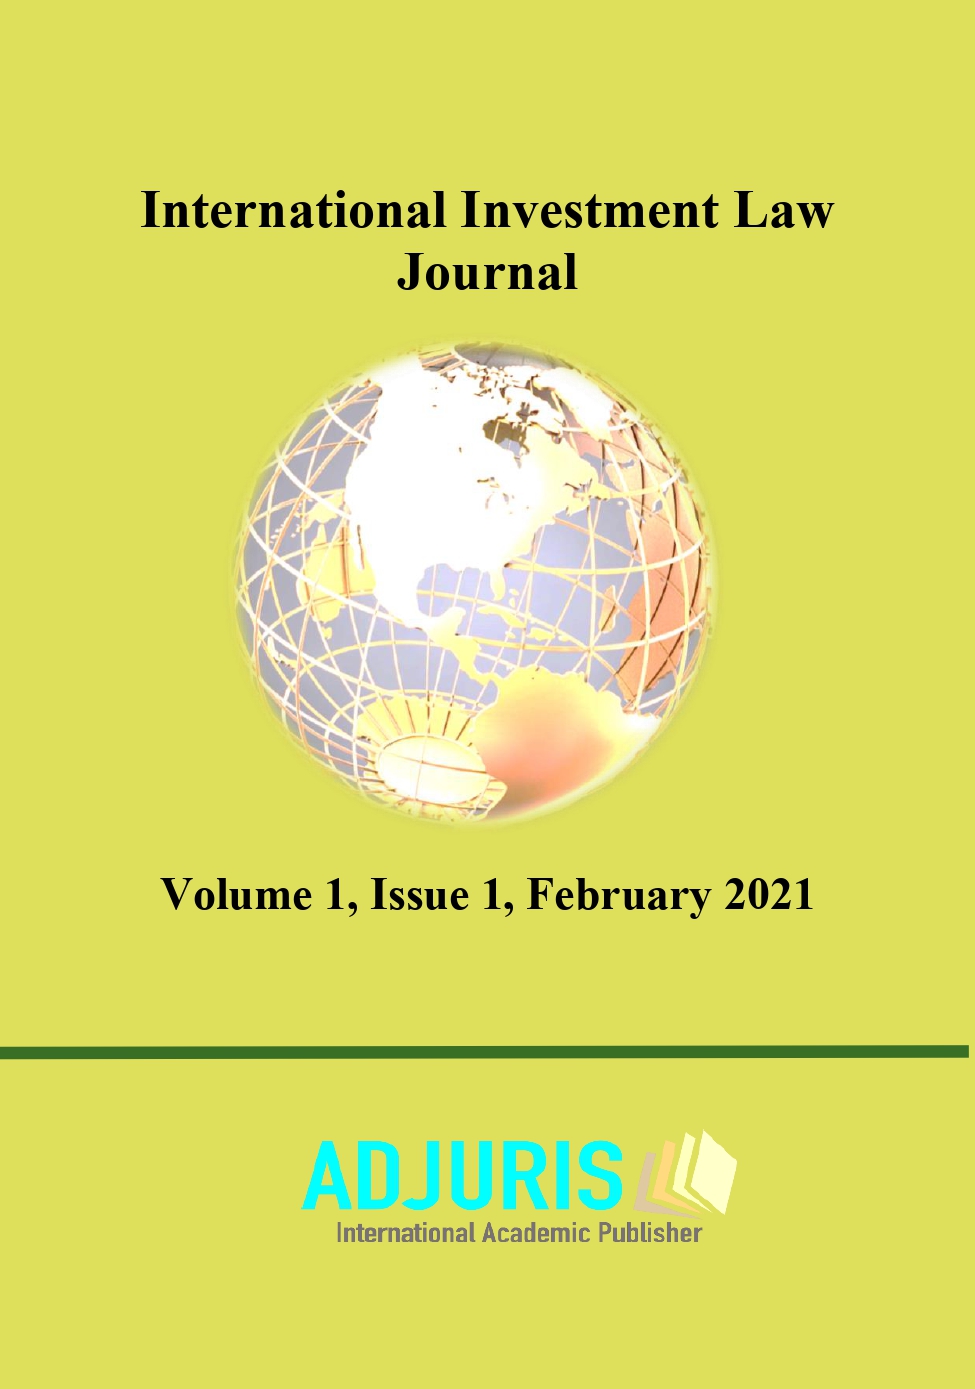 Surviving and ICSID Award. Post-Award Remedies in ICSID Arbitration: A Perspective of Contracting State’s Interest Cover Image